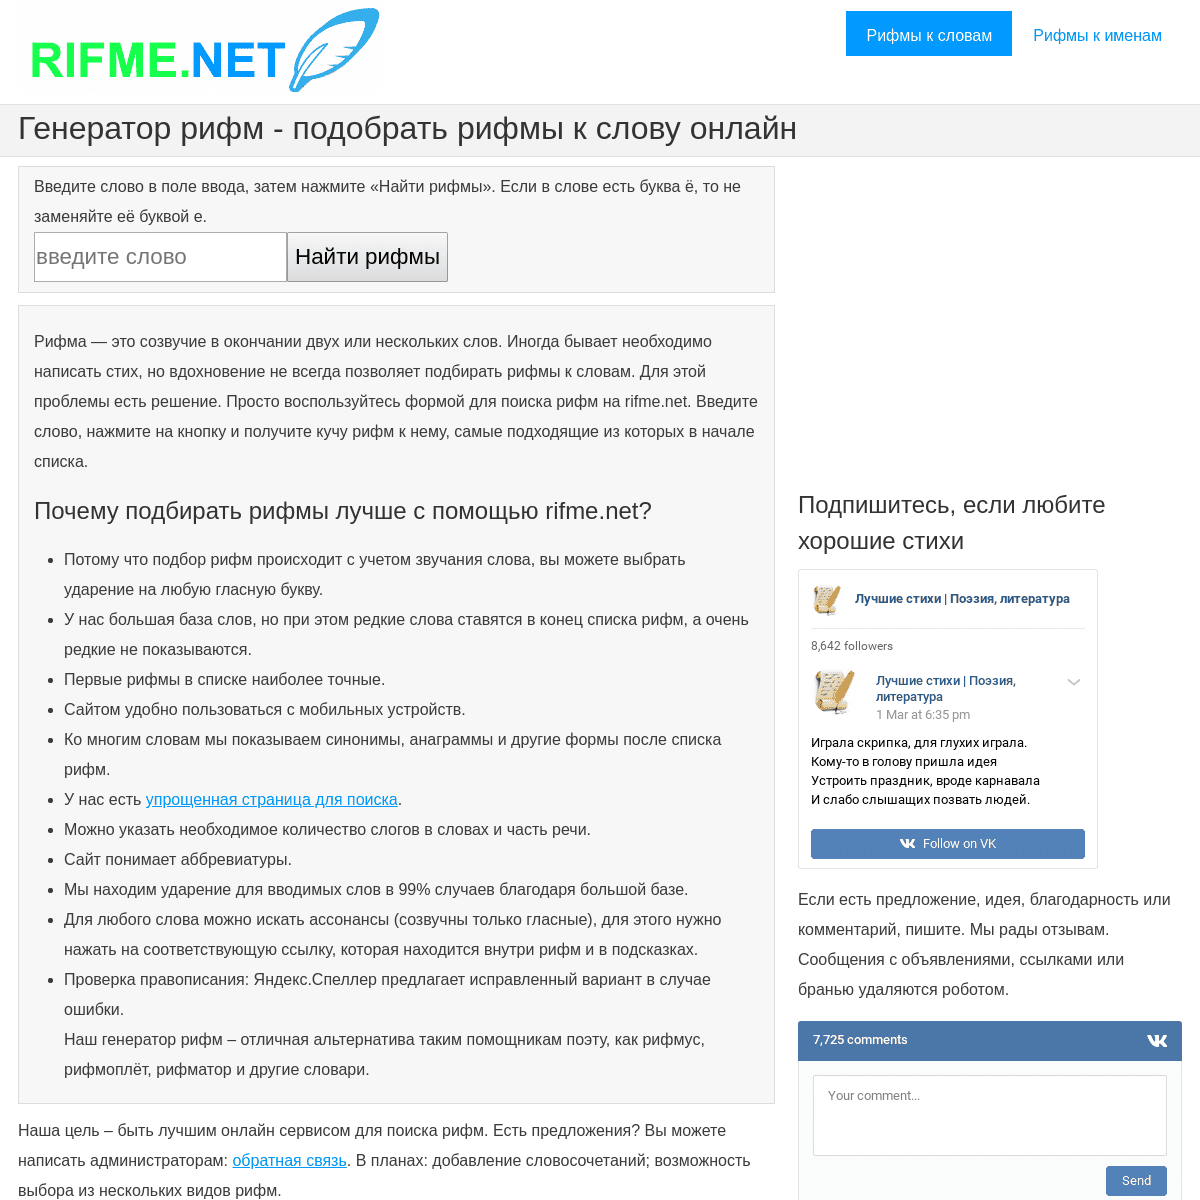 A complete backup of rifme.net